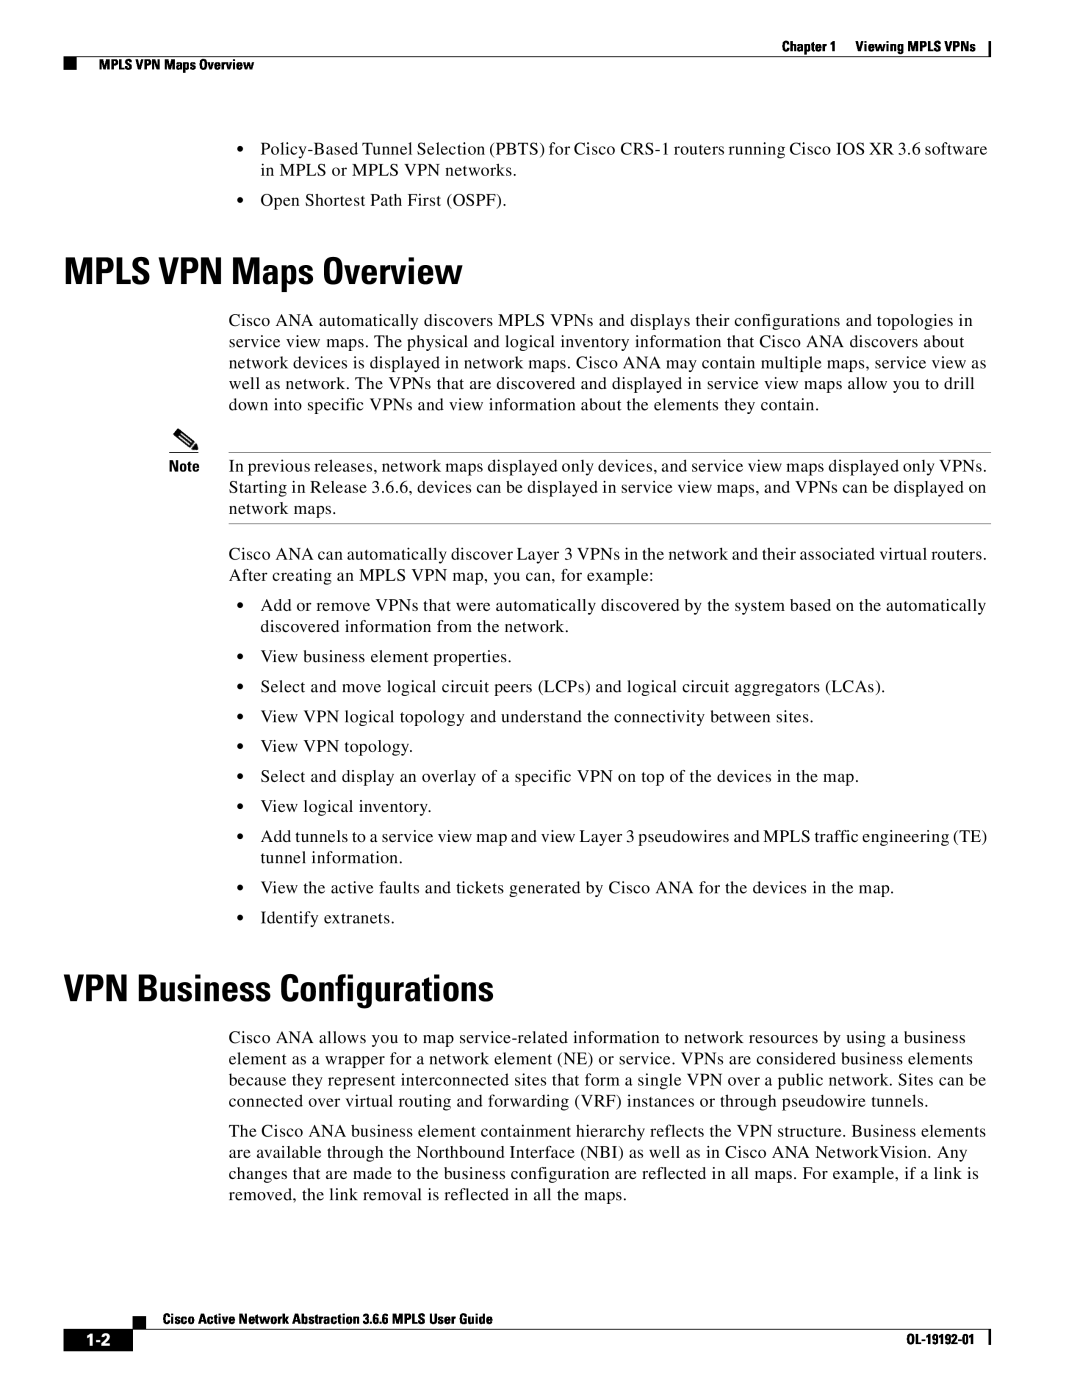 Cisco Systems 3.6.6 manual MPLS VPN Maps Overview, VPN Business Configurations 